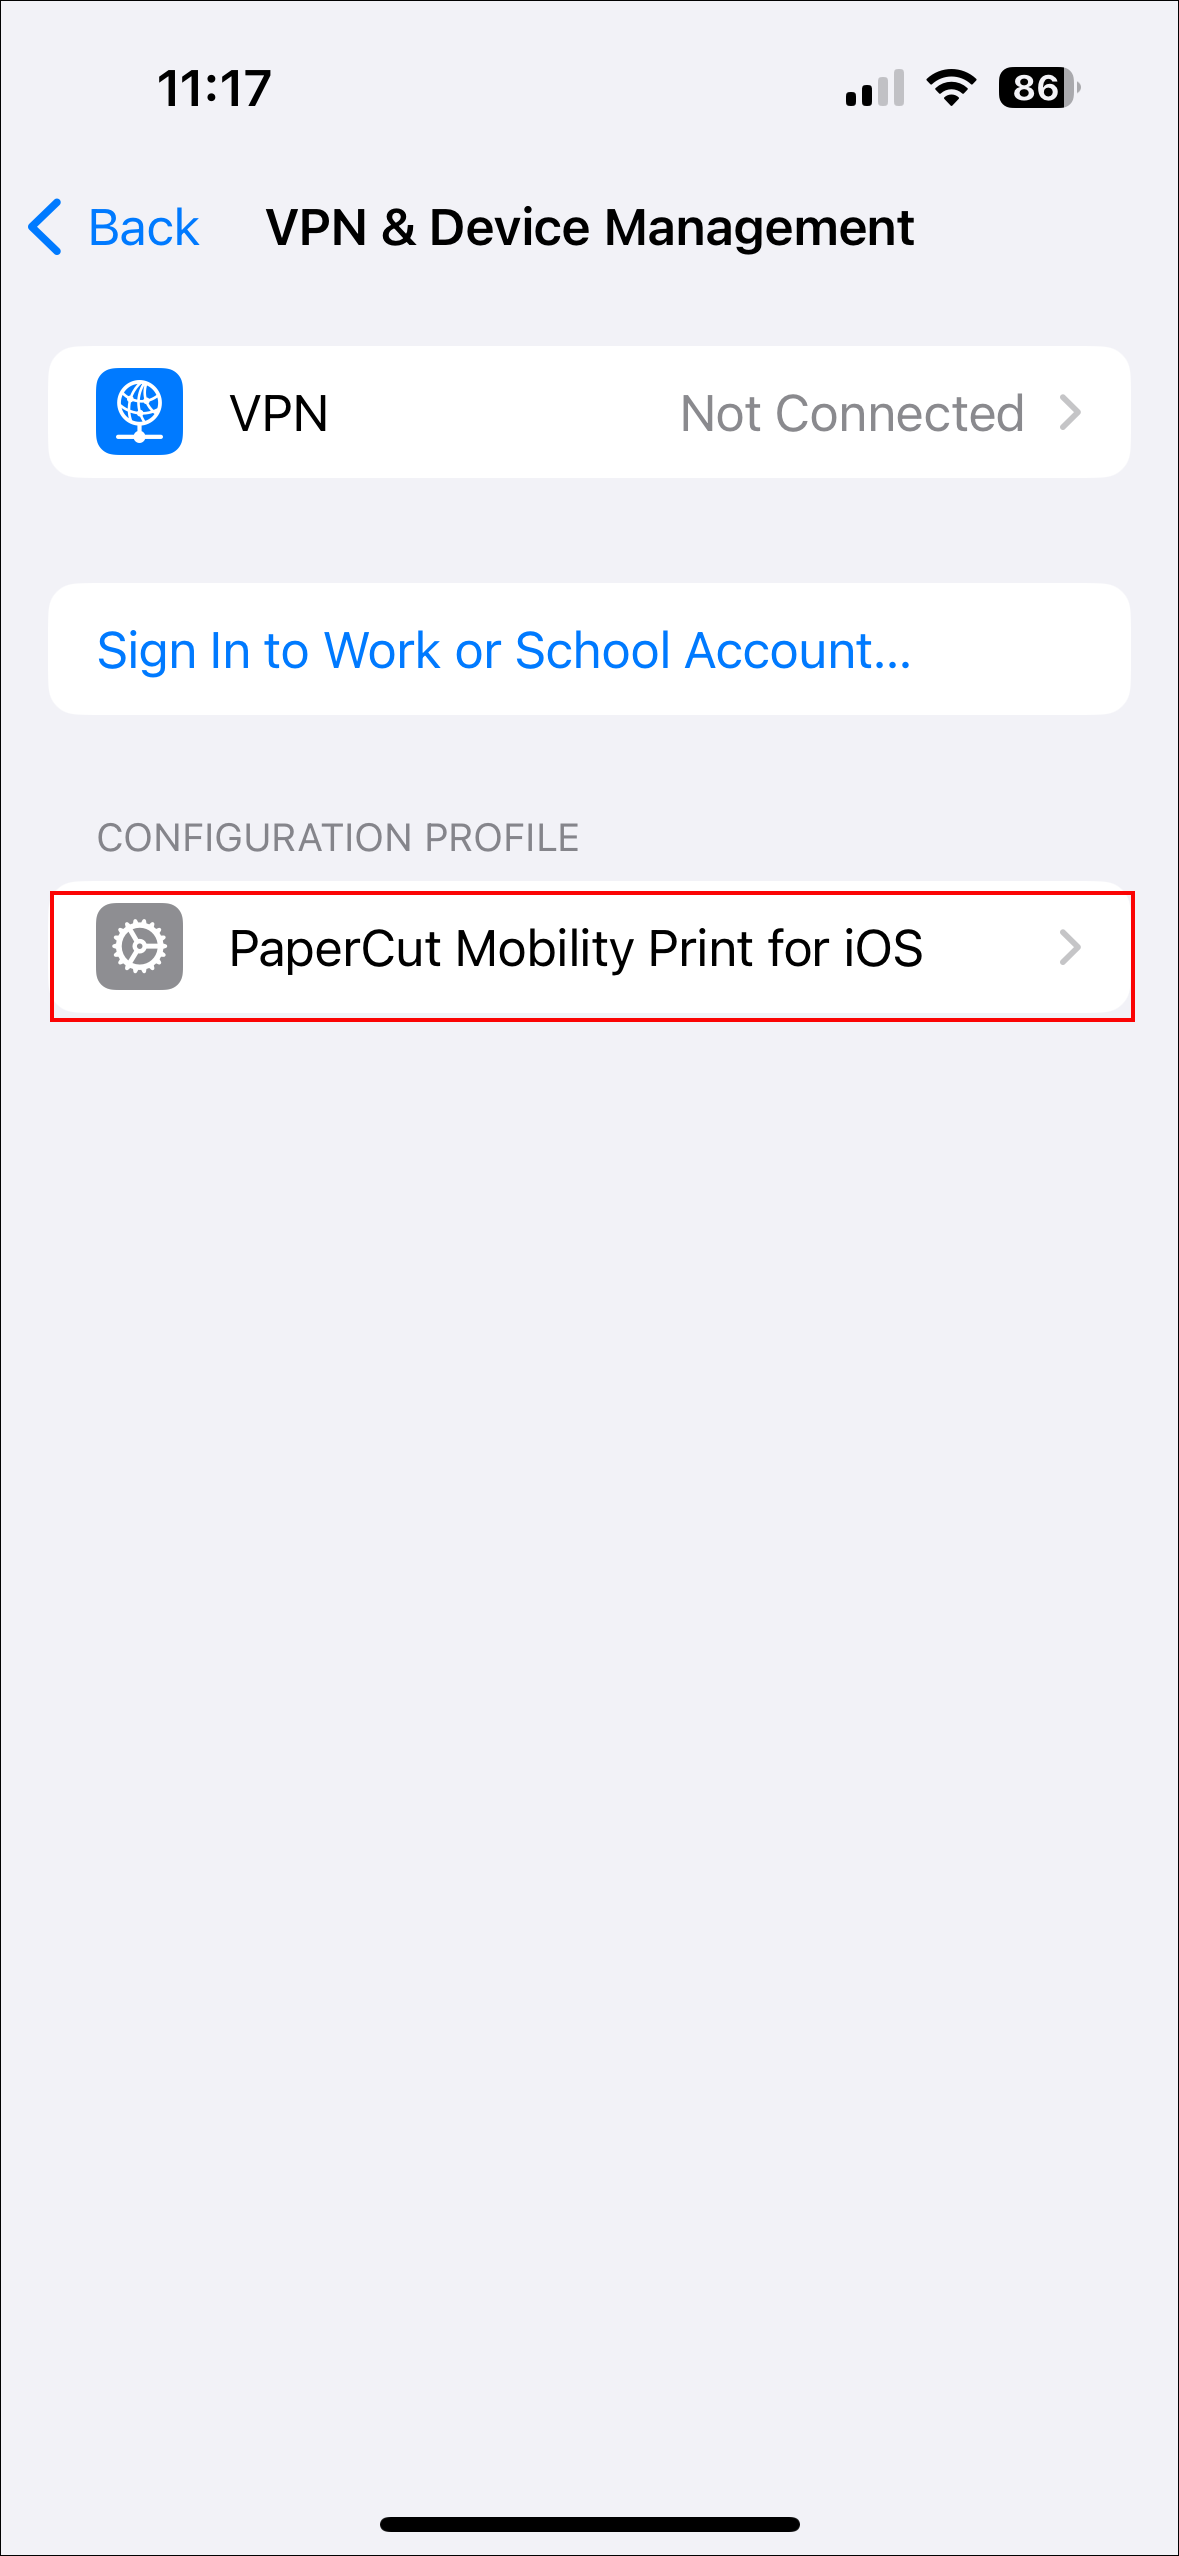 Papercut mobility print for iOS option